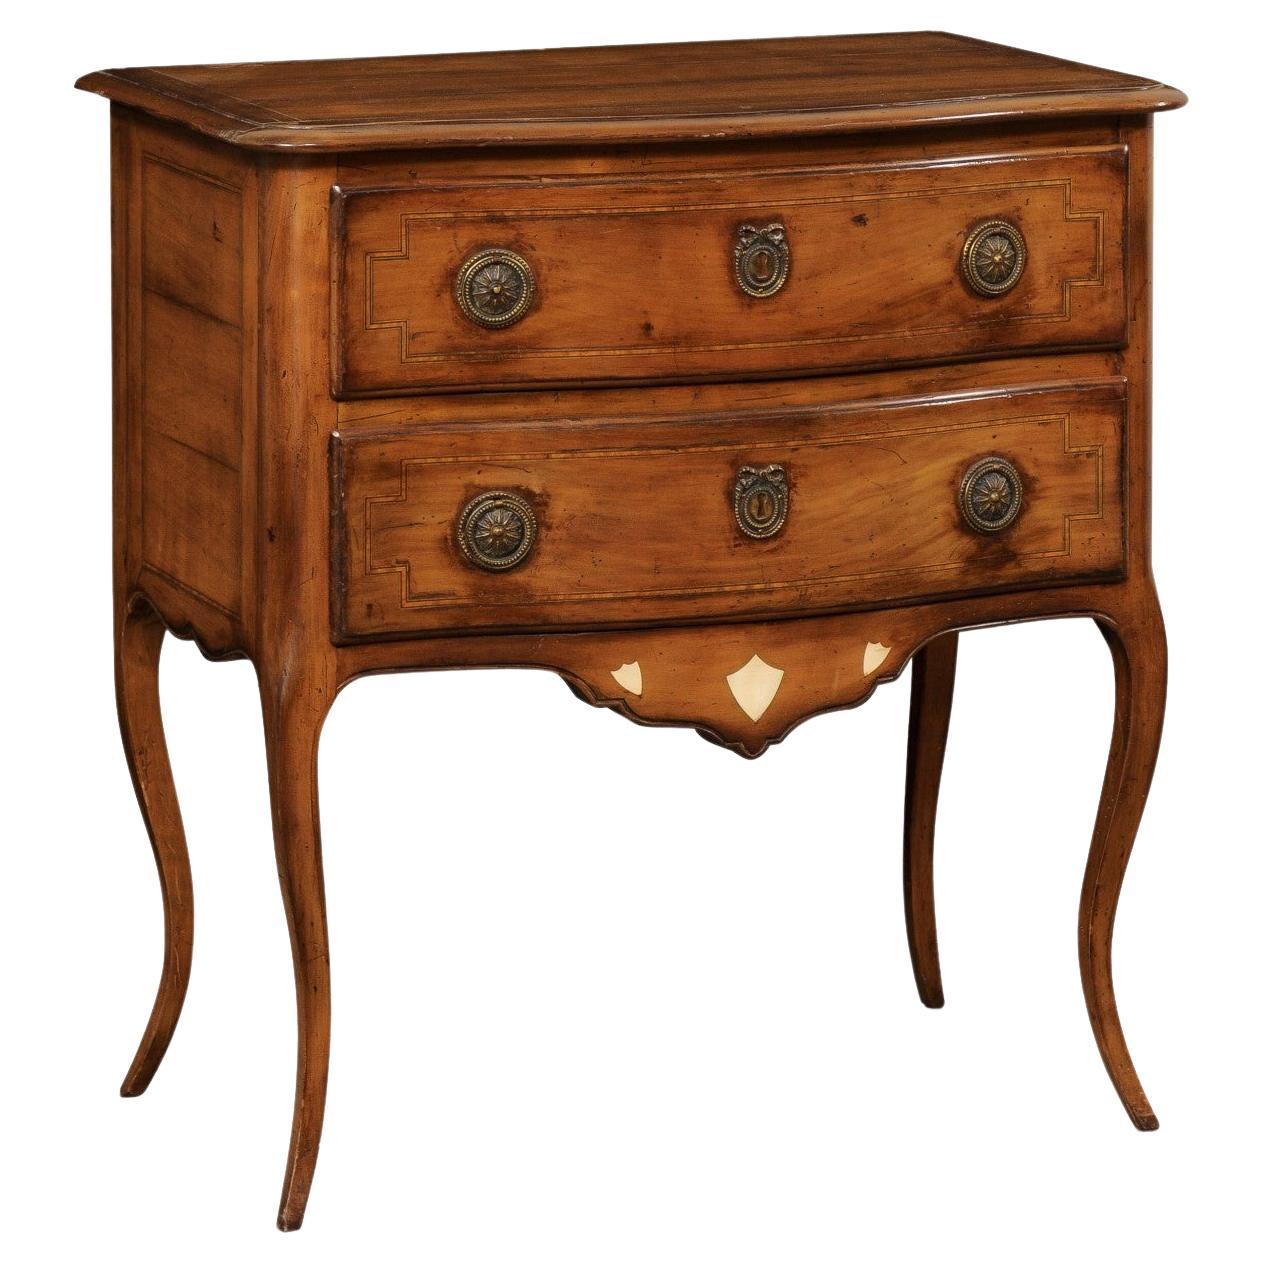 Elegant French Louis XV Raised Commode, Early 19th Century